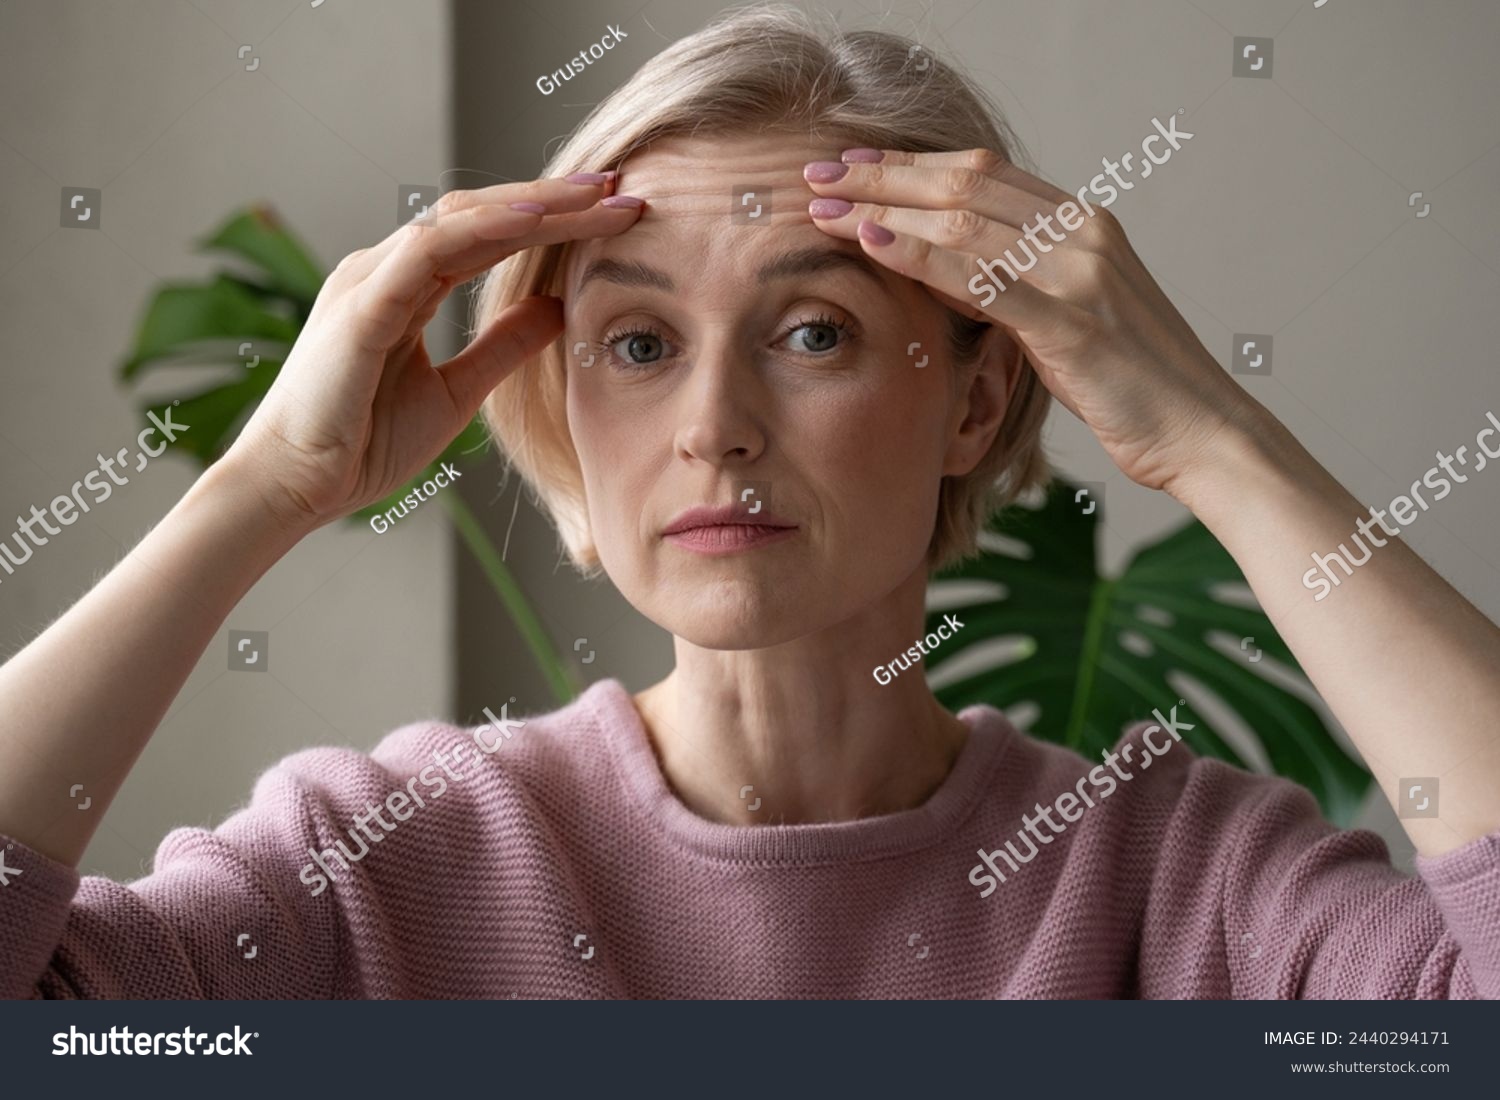 A contemplative mature woman is captured indoors while gently touching her forehead with both hands, appearing introspective or concerned. She wears a soft pink sweater, and her expression conveys #2440294171